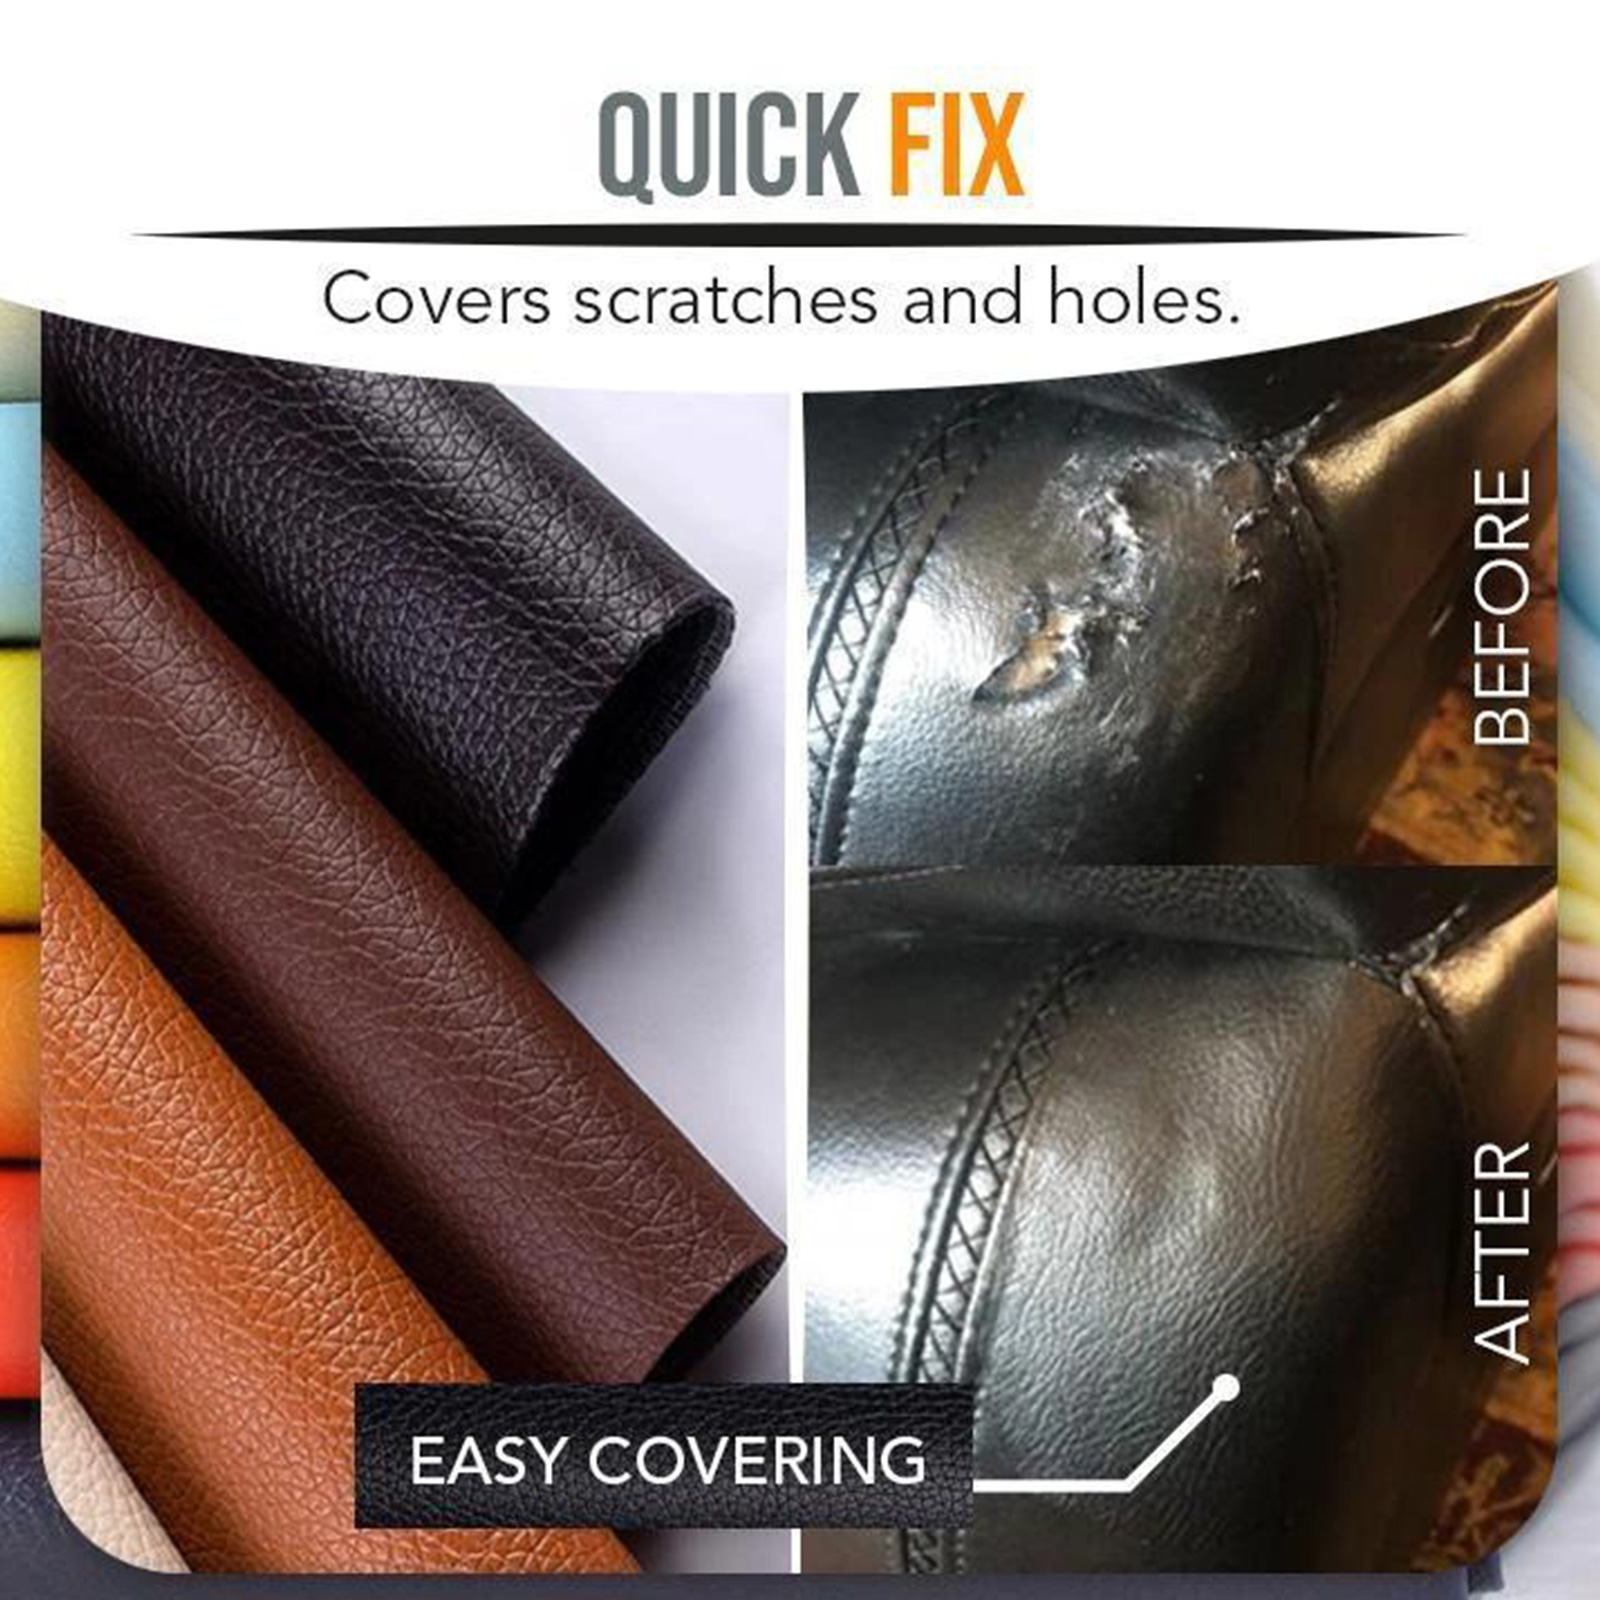 Leather Repair Patch Kit 8 x 12 inch, 7 Colors Available, CABINAHOME  Self-Adhesive Leather Tape for Couches, Chairs, Car Seats, Bags, Jackets,  Sofa, Boots (Litchi) 